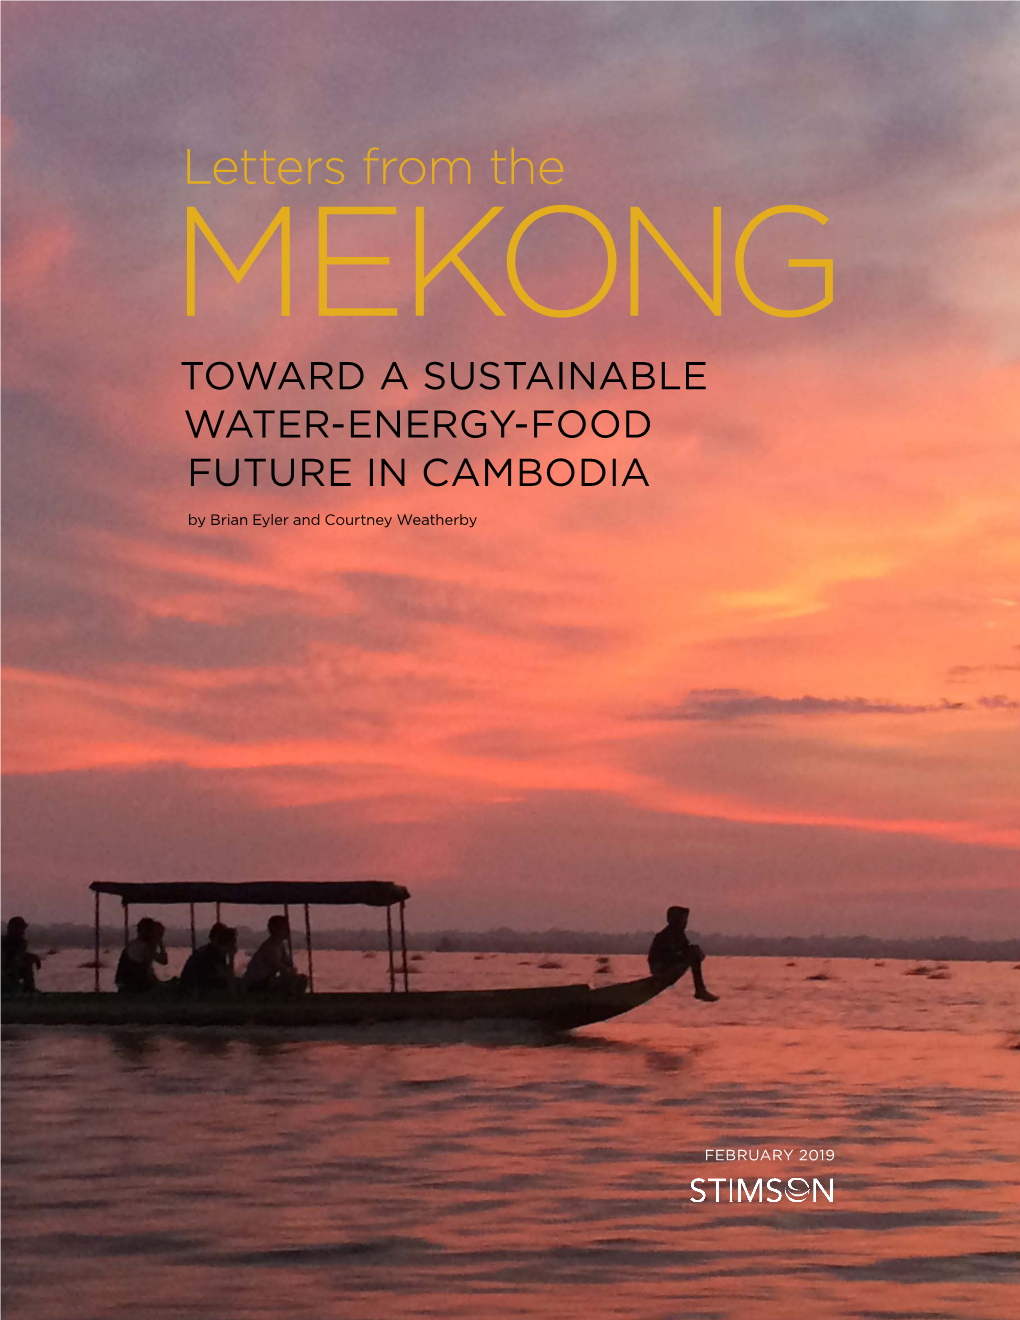 Letters from the Mekong: Towards a Sustainable Water-Energy-Food